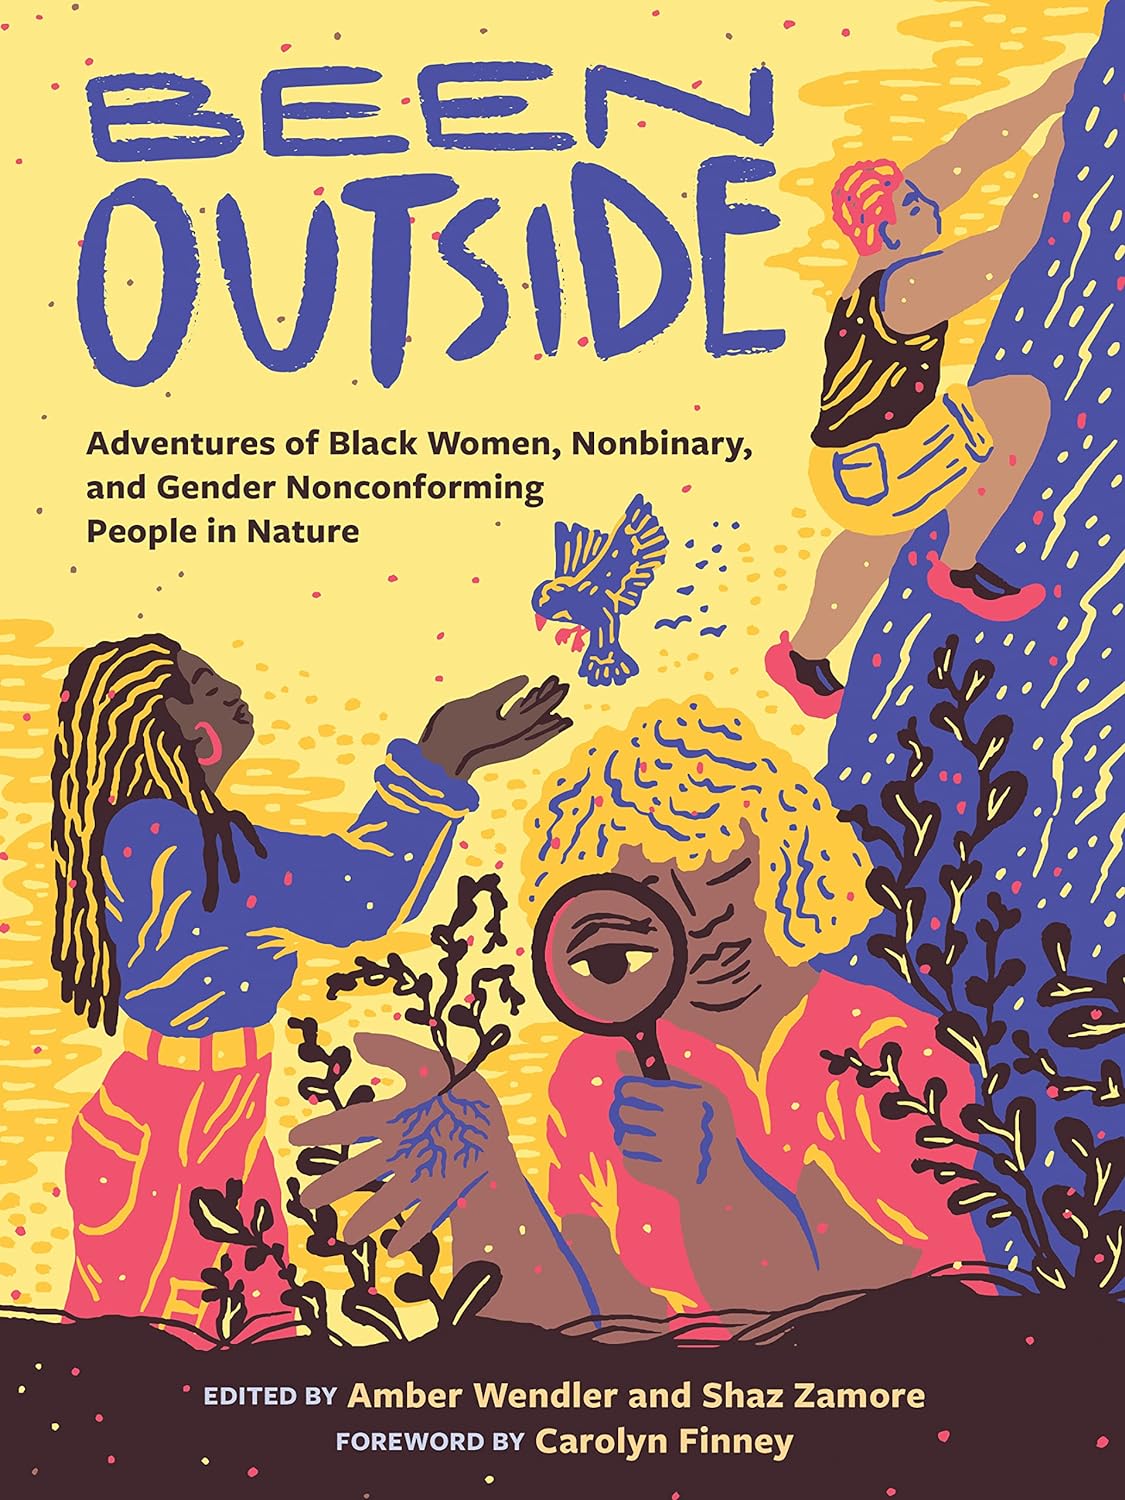 cover of Been Outside: Adventures of Black Women, Nonbinary, and Gender Nonconforming People in Nature, edited by Amber Wendler and Shaz Zamore